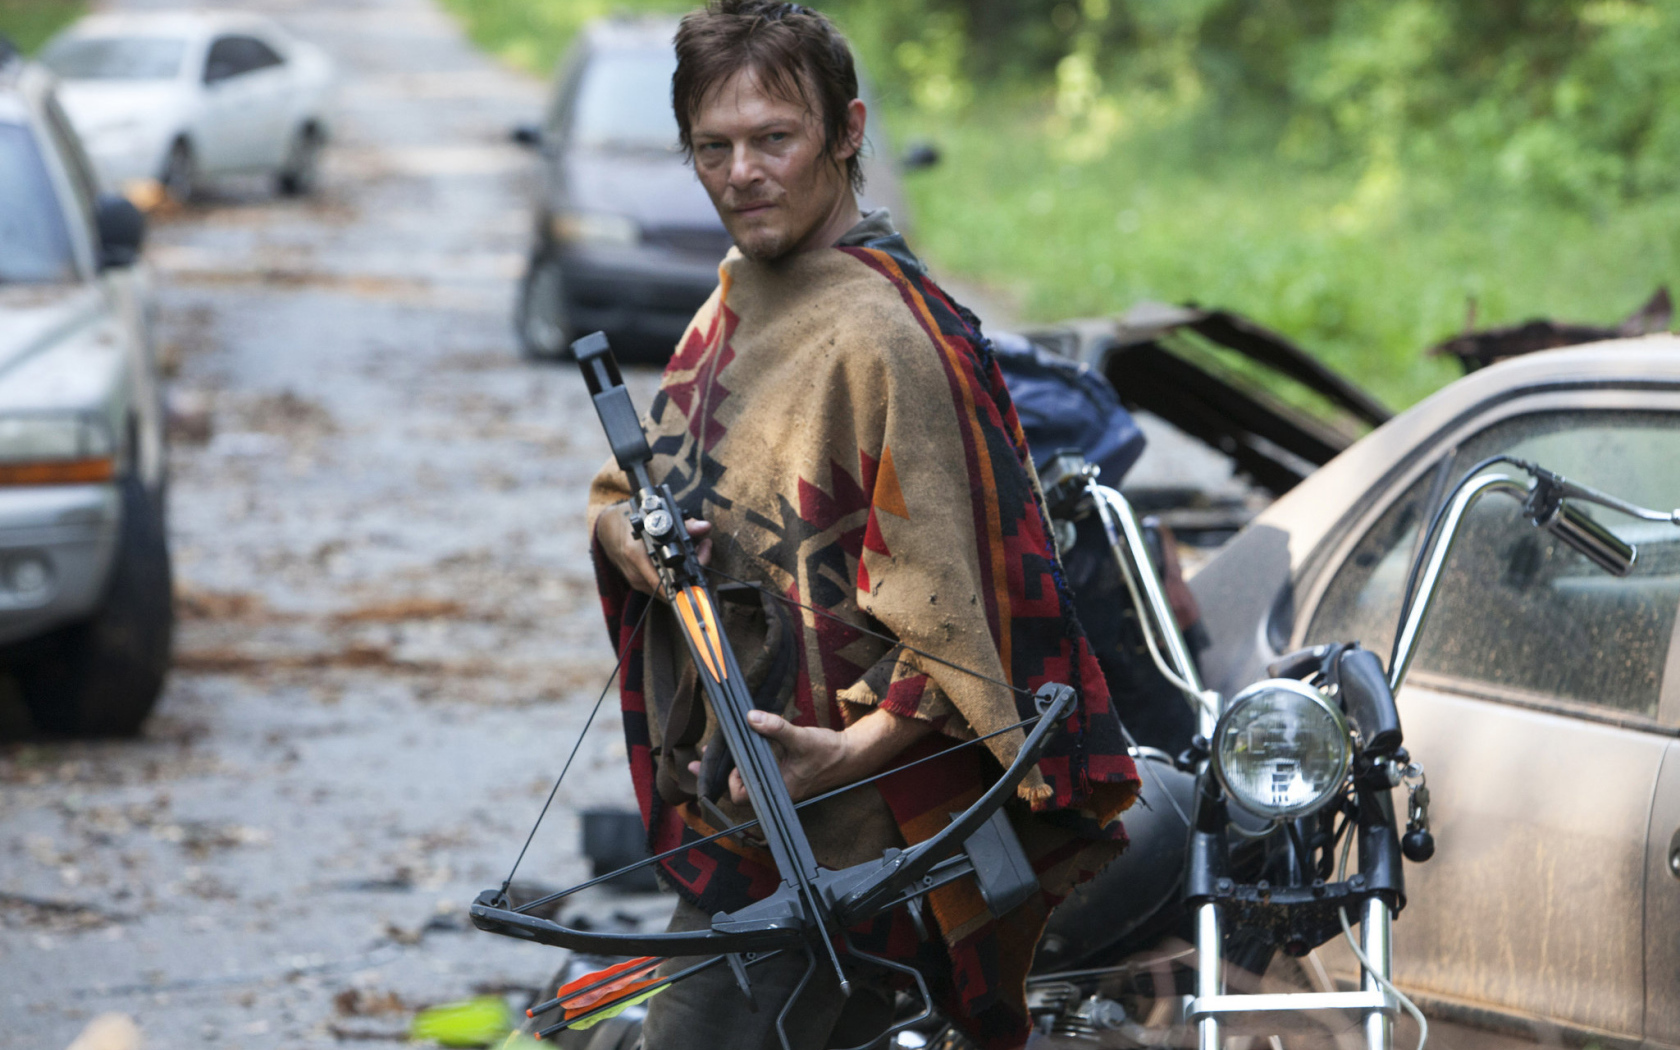 Daryl with a crossbow from The Walking Dead